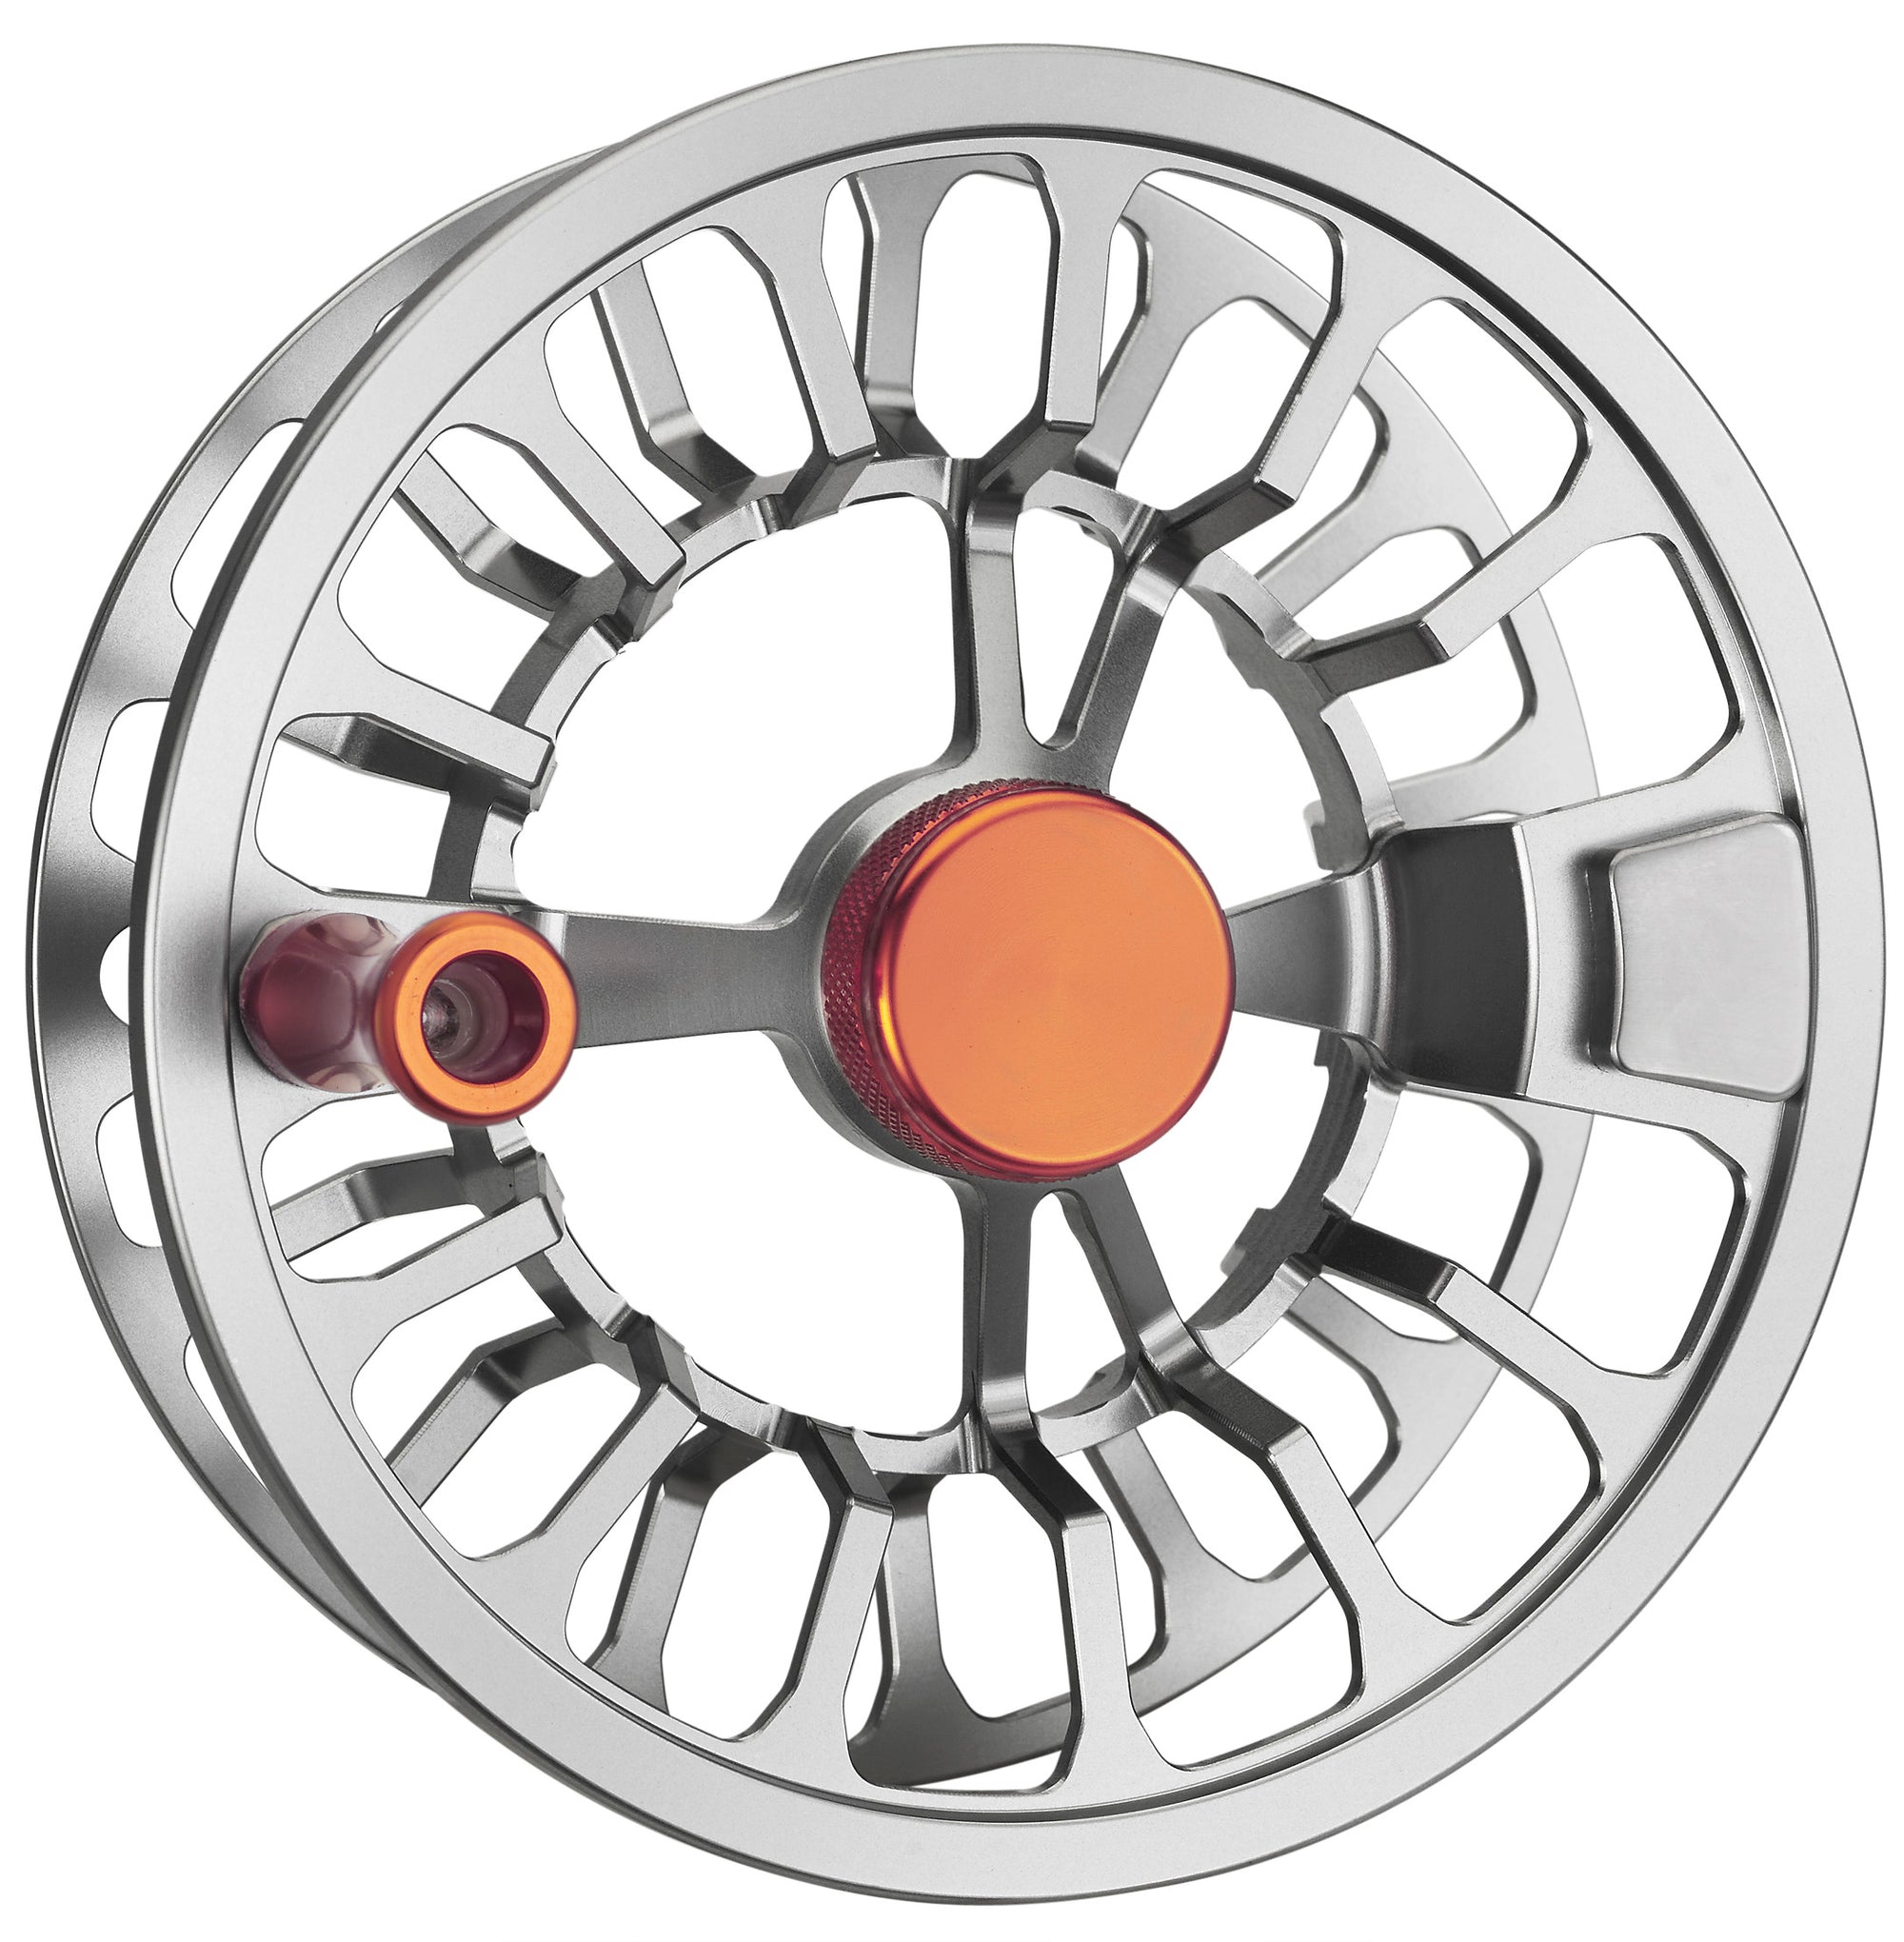  Cheeky Fishing Limitless 325 Fly Reel, Orange/Silver : Sports  & Outdoors